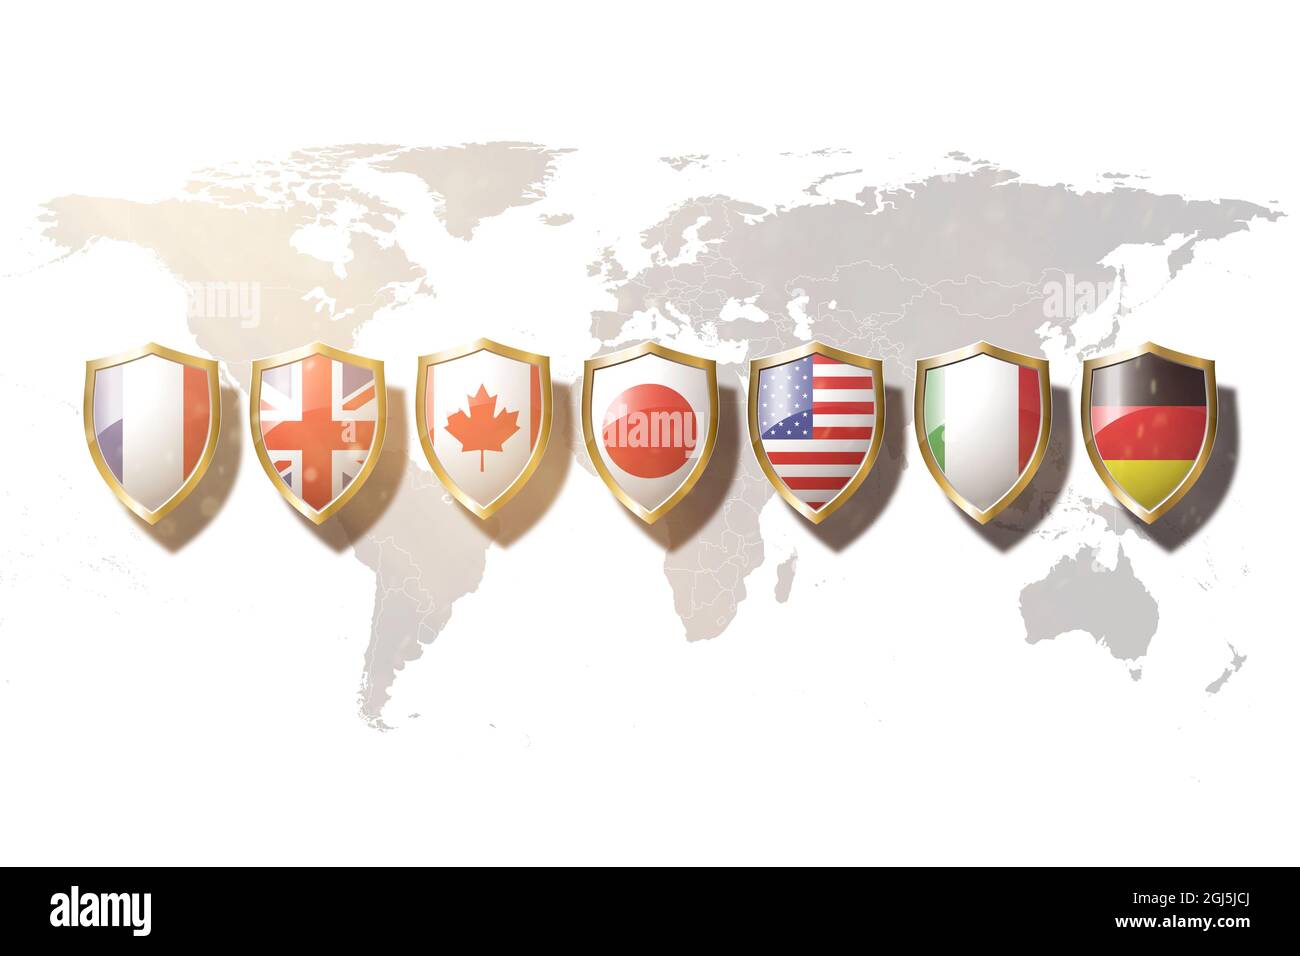 G7 countries flag in golden shield on world map background. Stock Photo